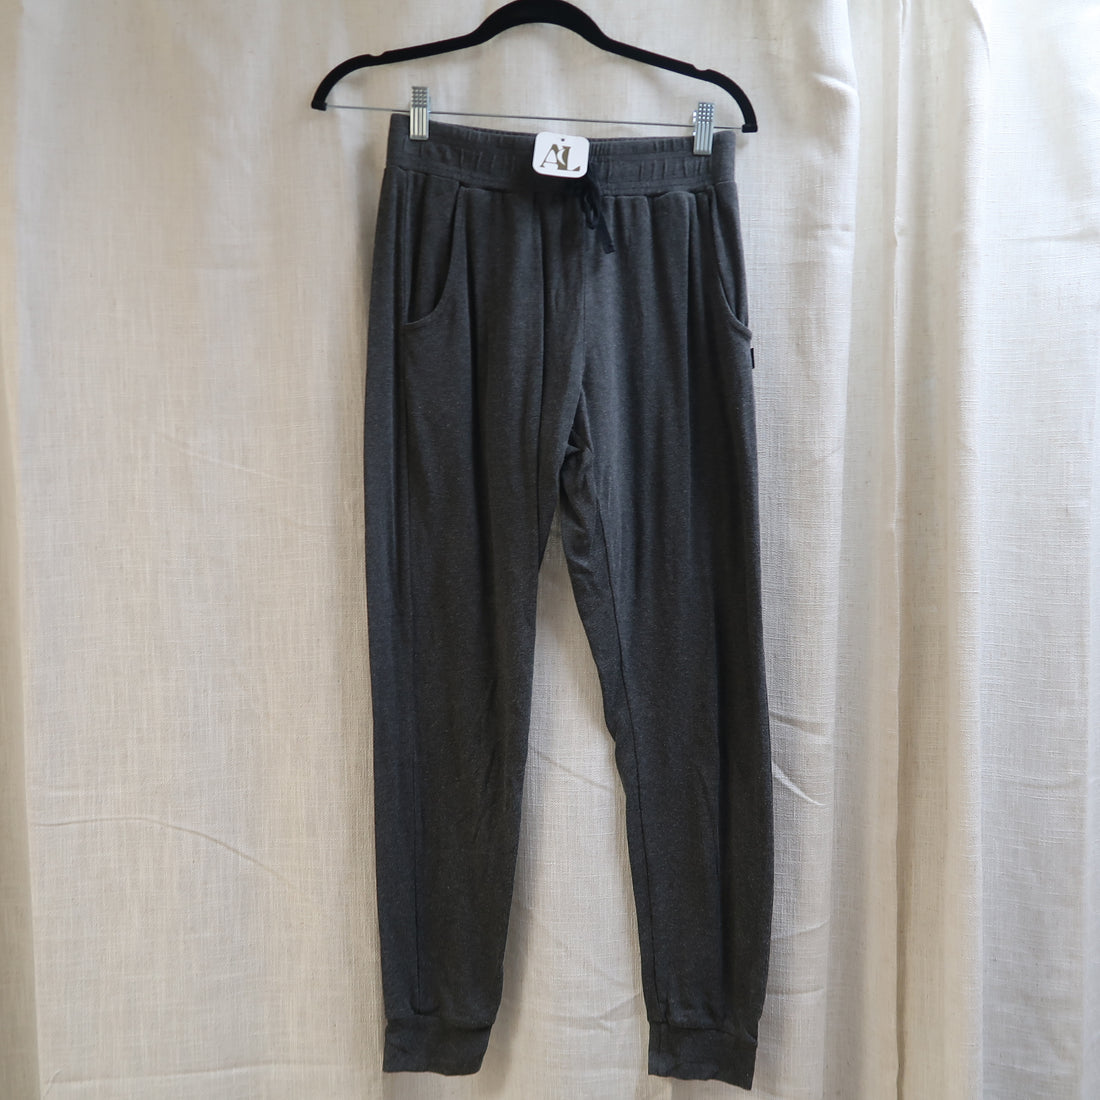 Kindred Clothing Co - Pants (Women&